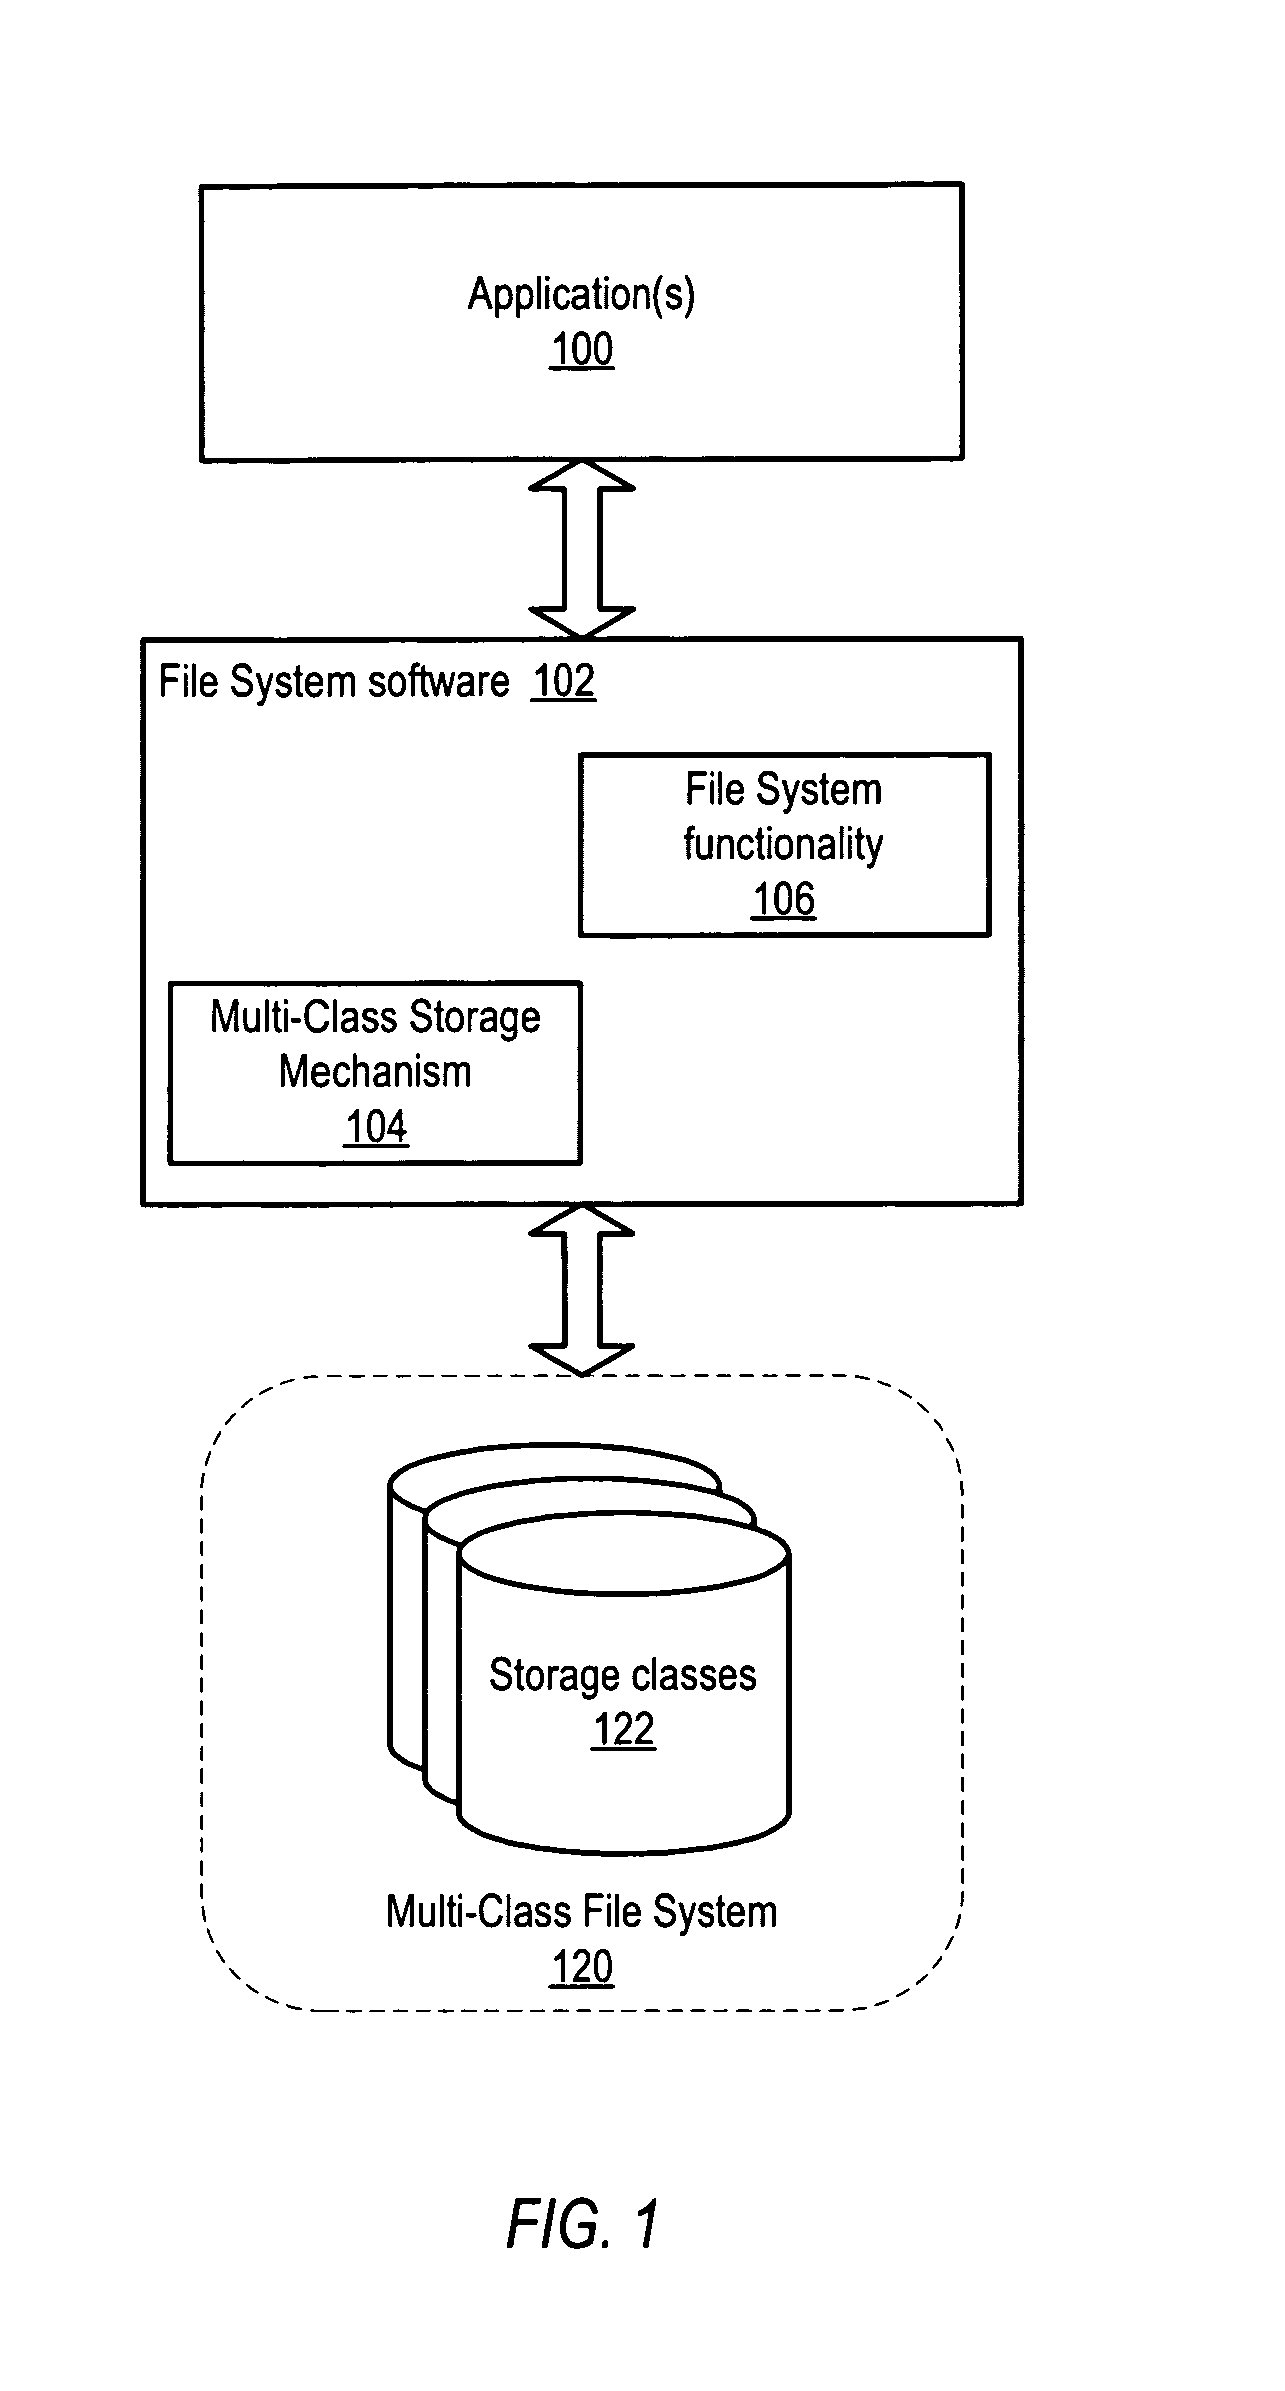 Restore mechanism for a multi-class file system